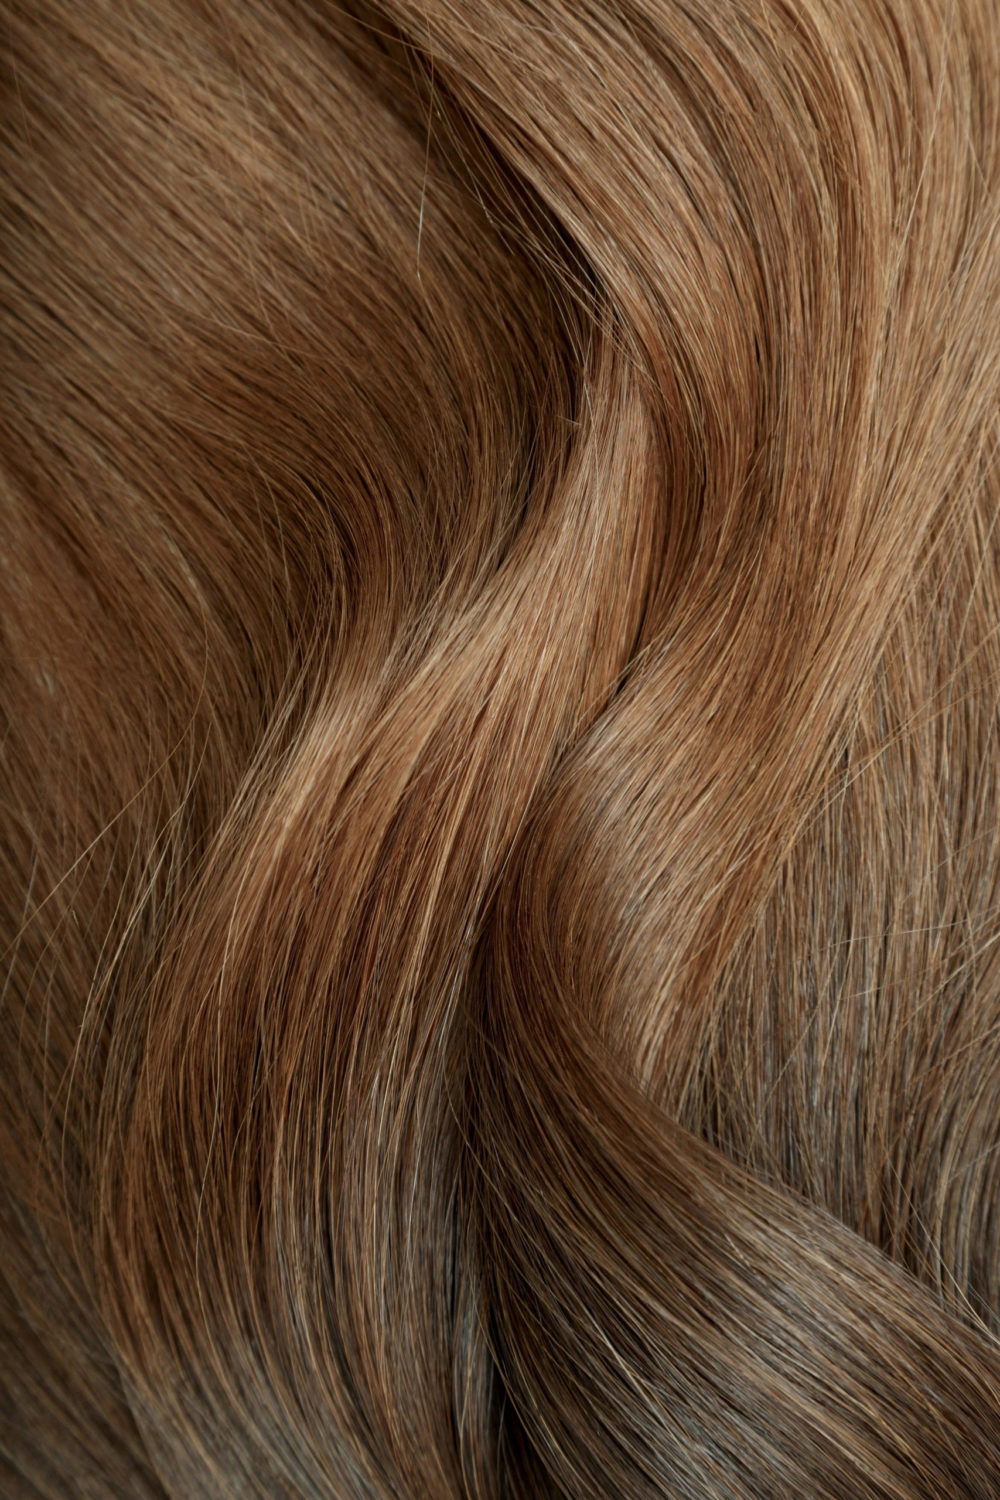 Chestnut colored hair in a vertical image with a swatch of hair in view